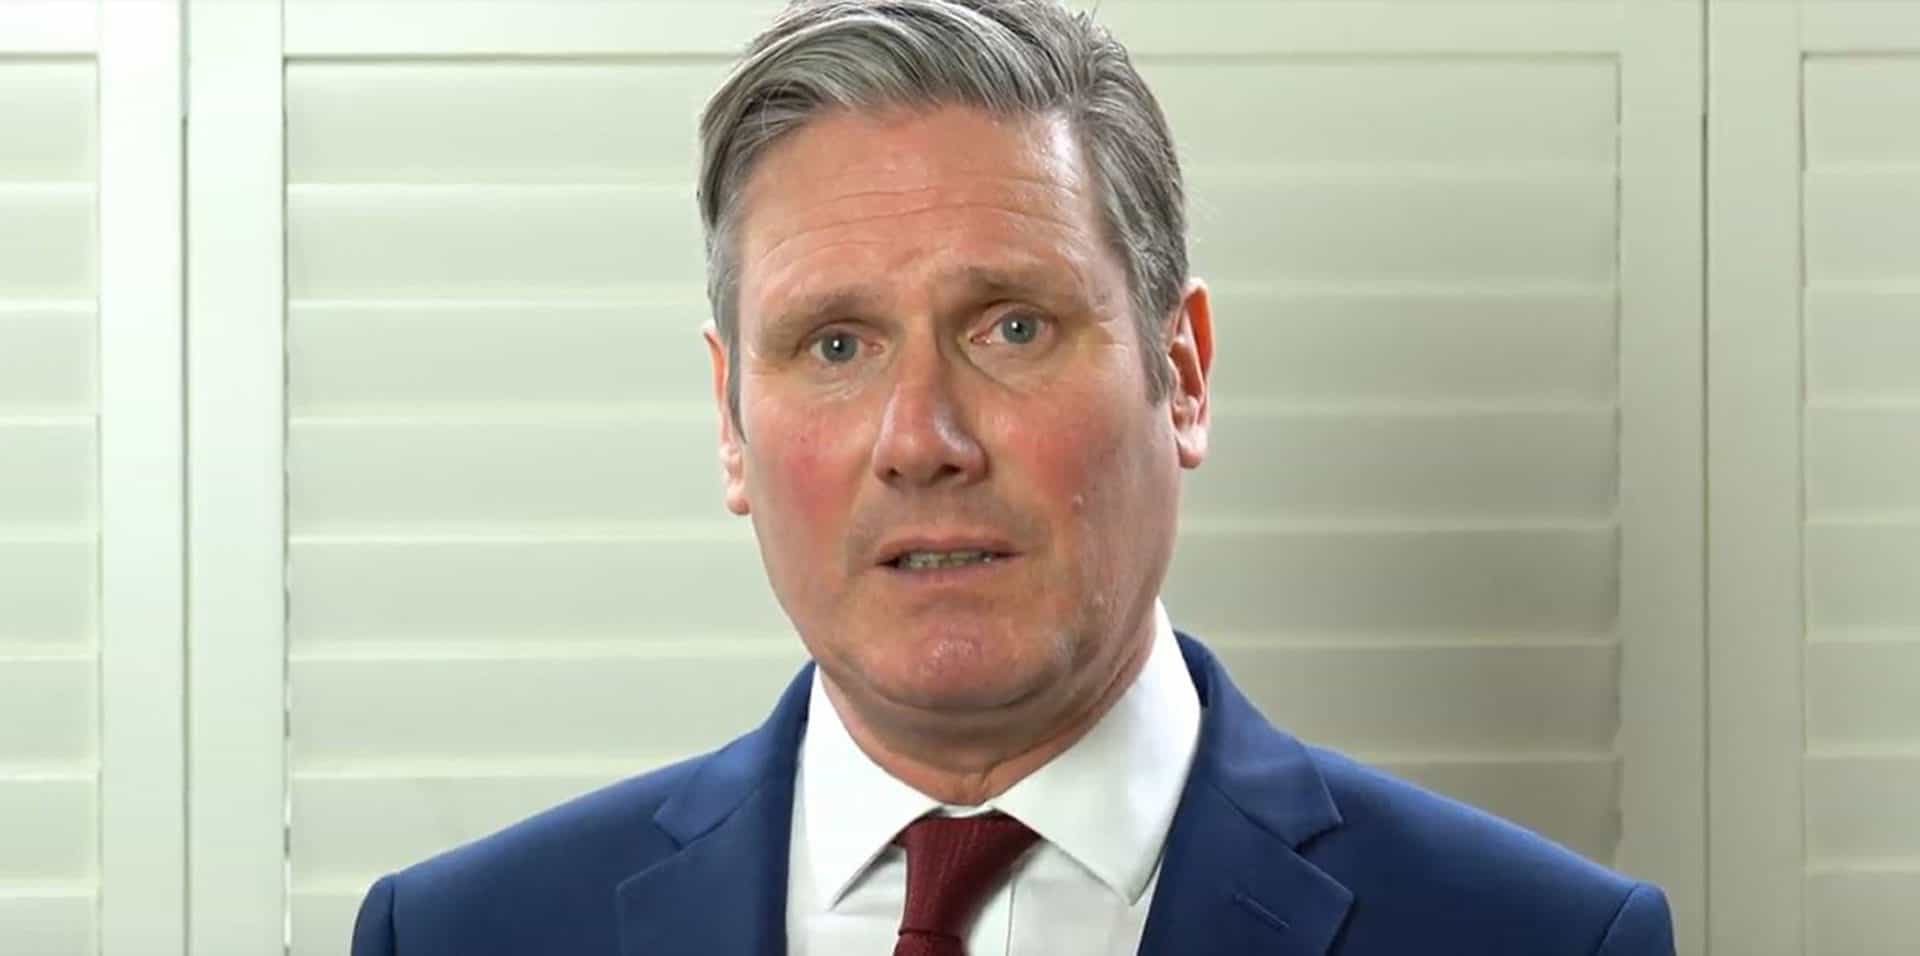 Jewish leaders praise Starmer on moves to tackle anti-Semitism